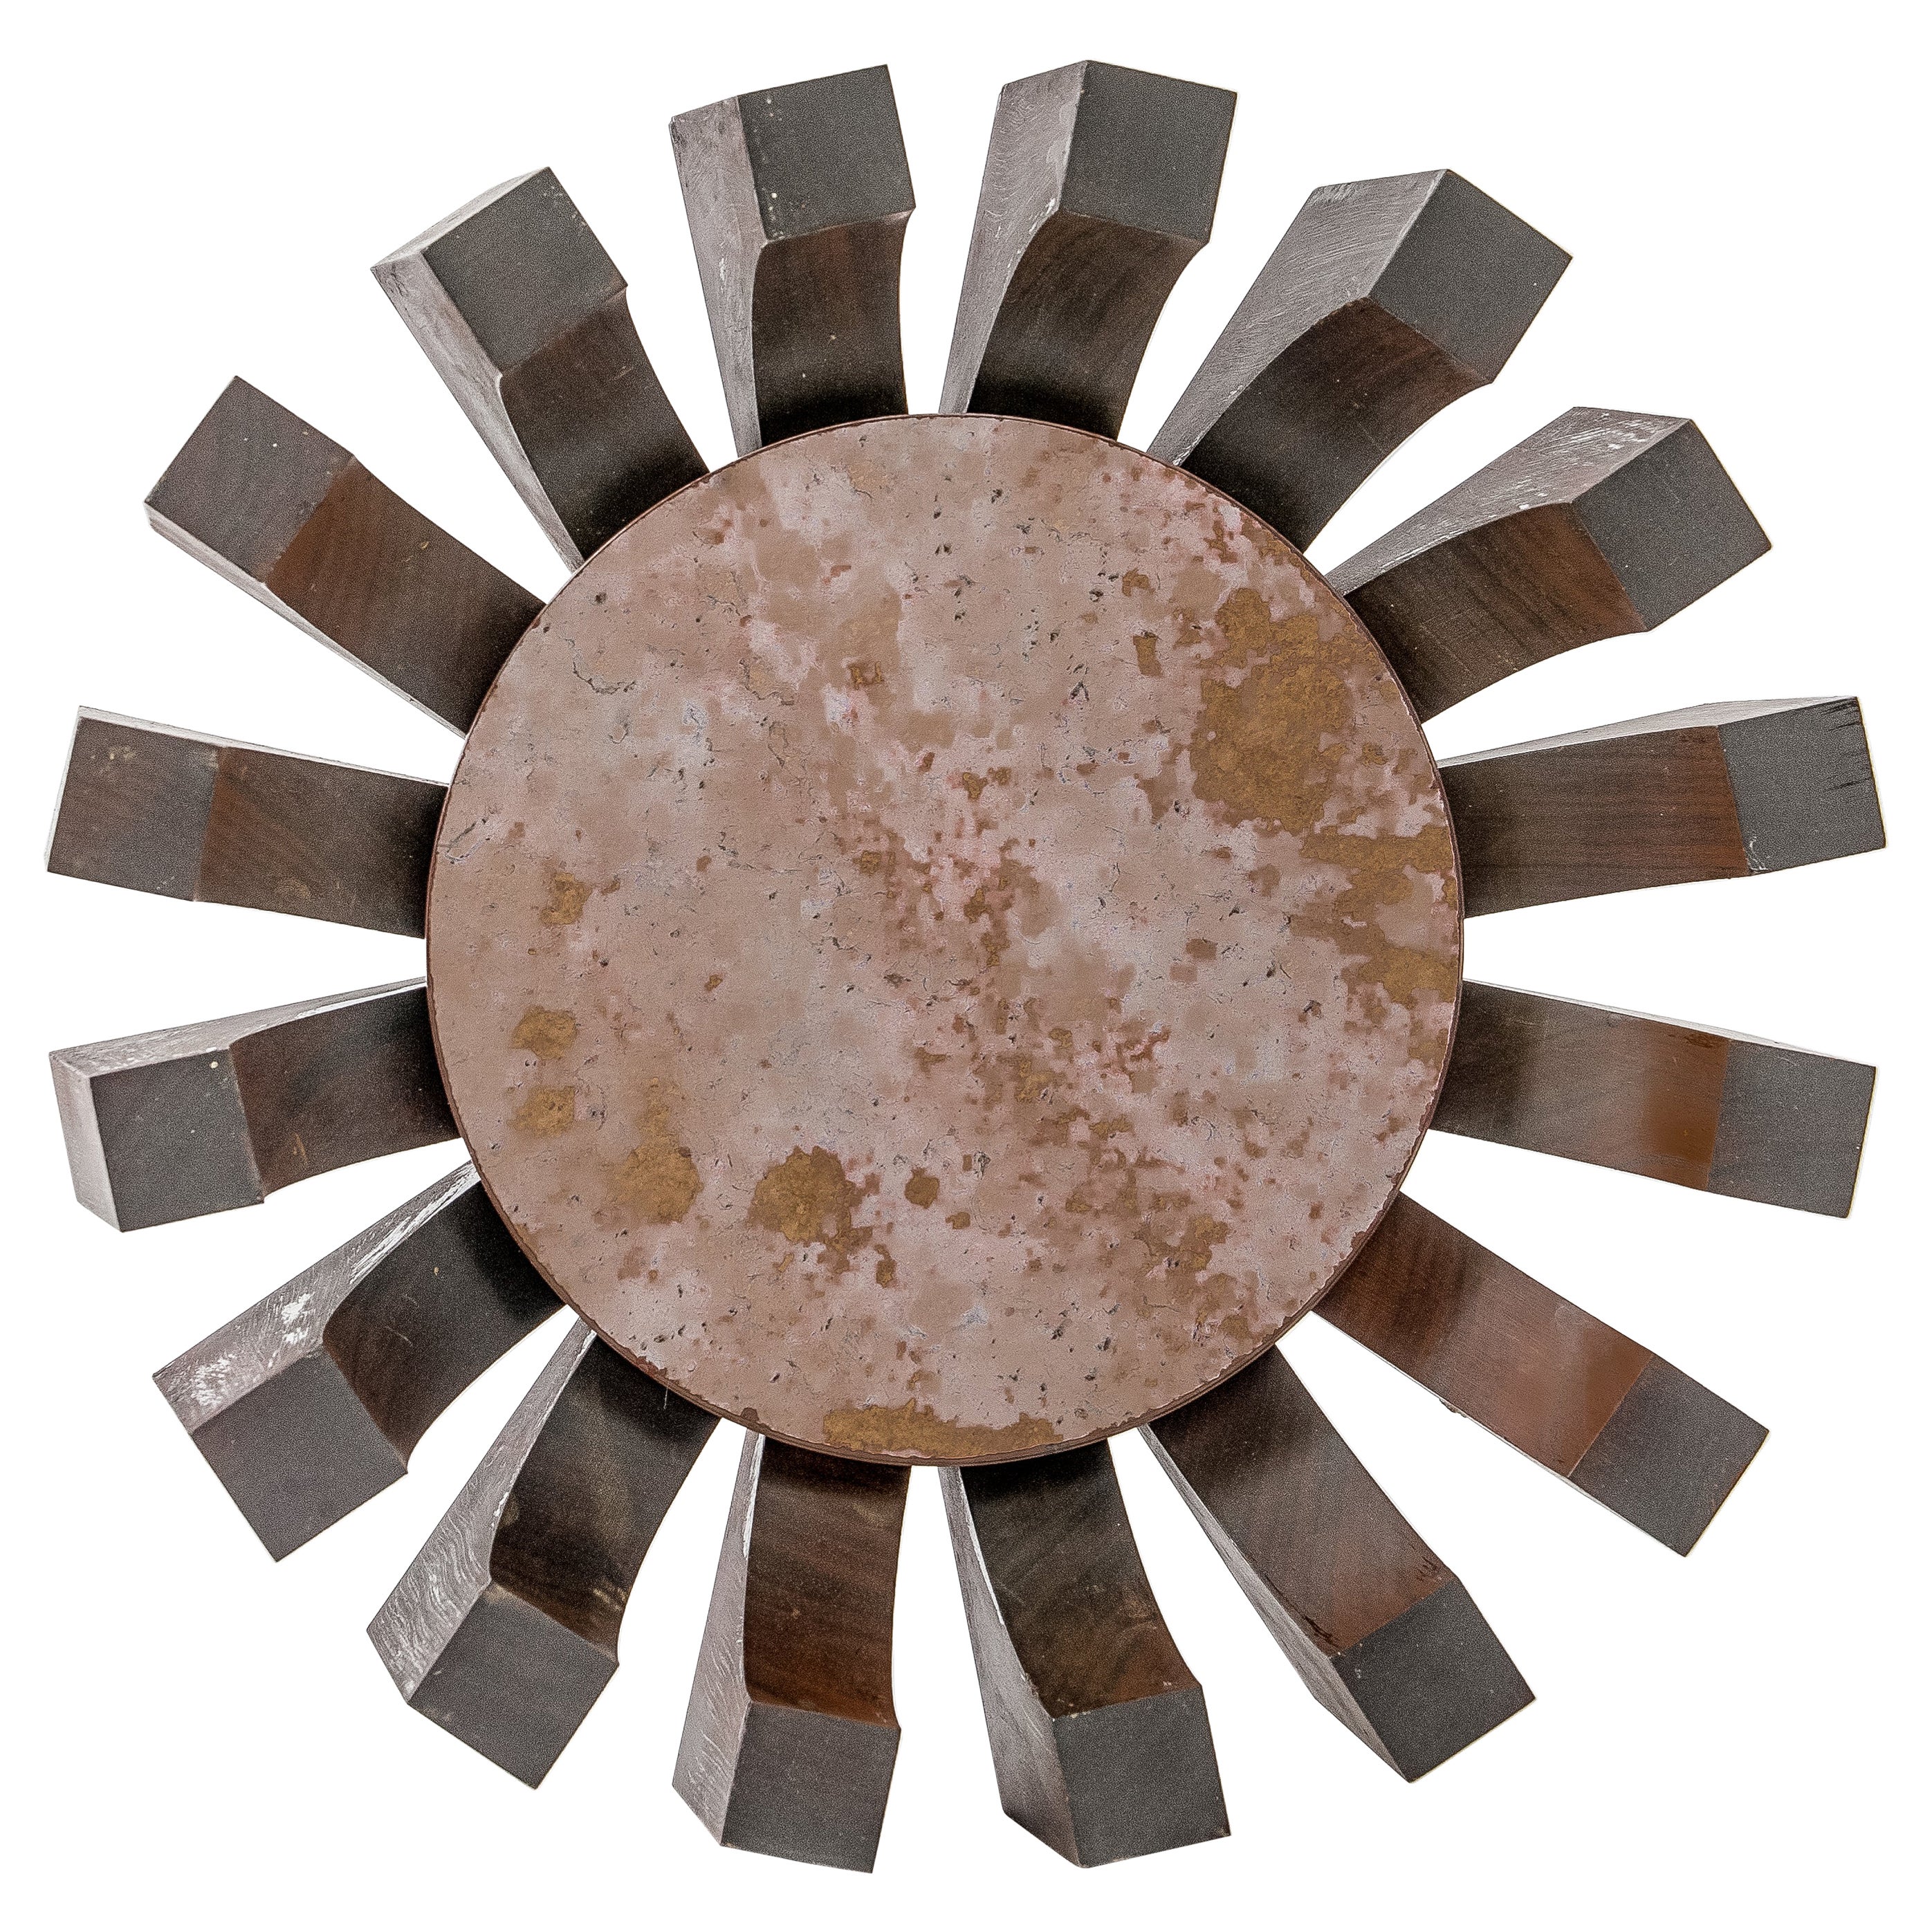 Whimsical sun mirror made of individually carved walnut pieces held together by a metal structure. The mirror is a smoked antique glass.